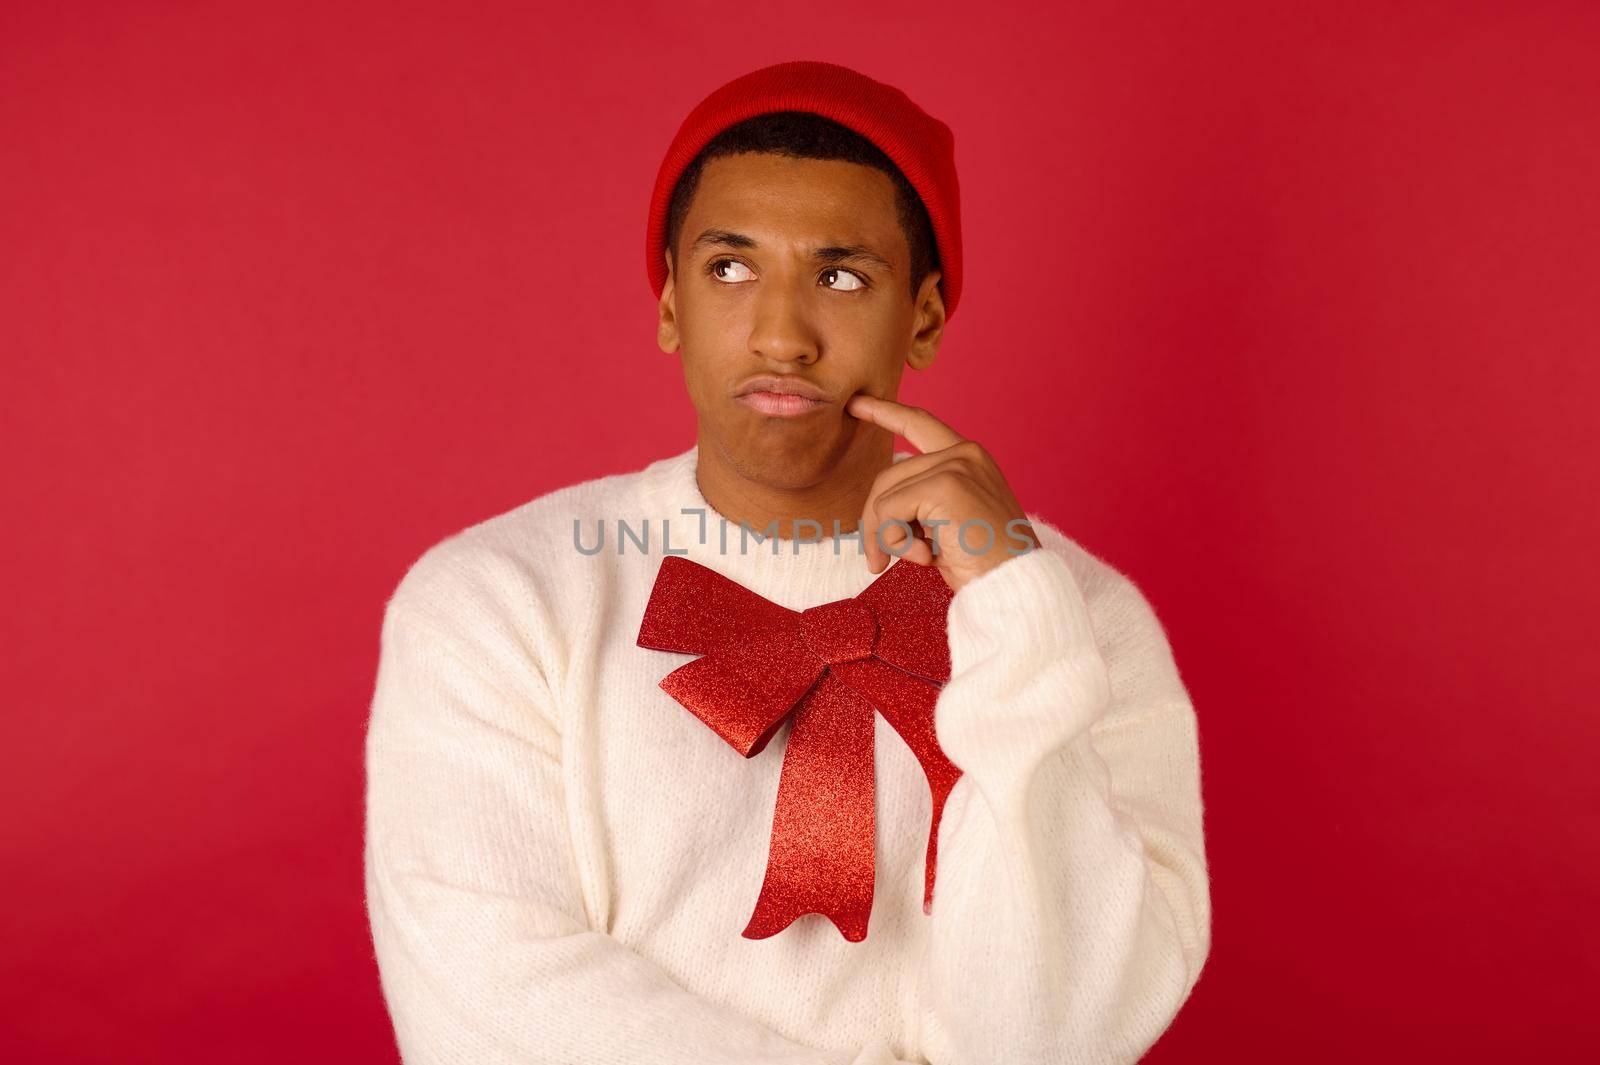 Man on red backgraound. Dark-skinned man with a red ribbon on red background